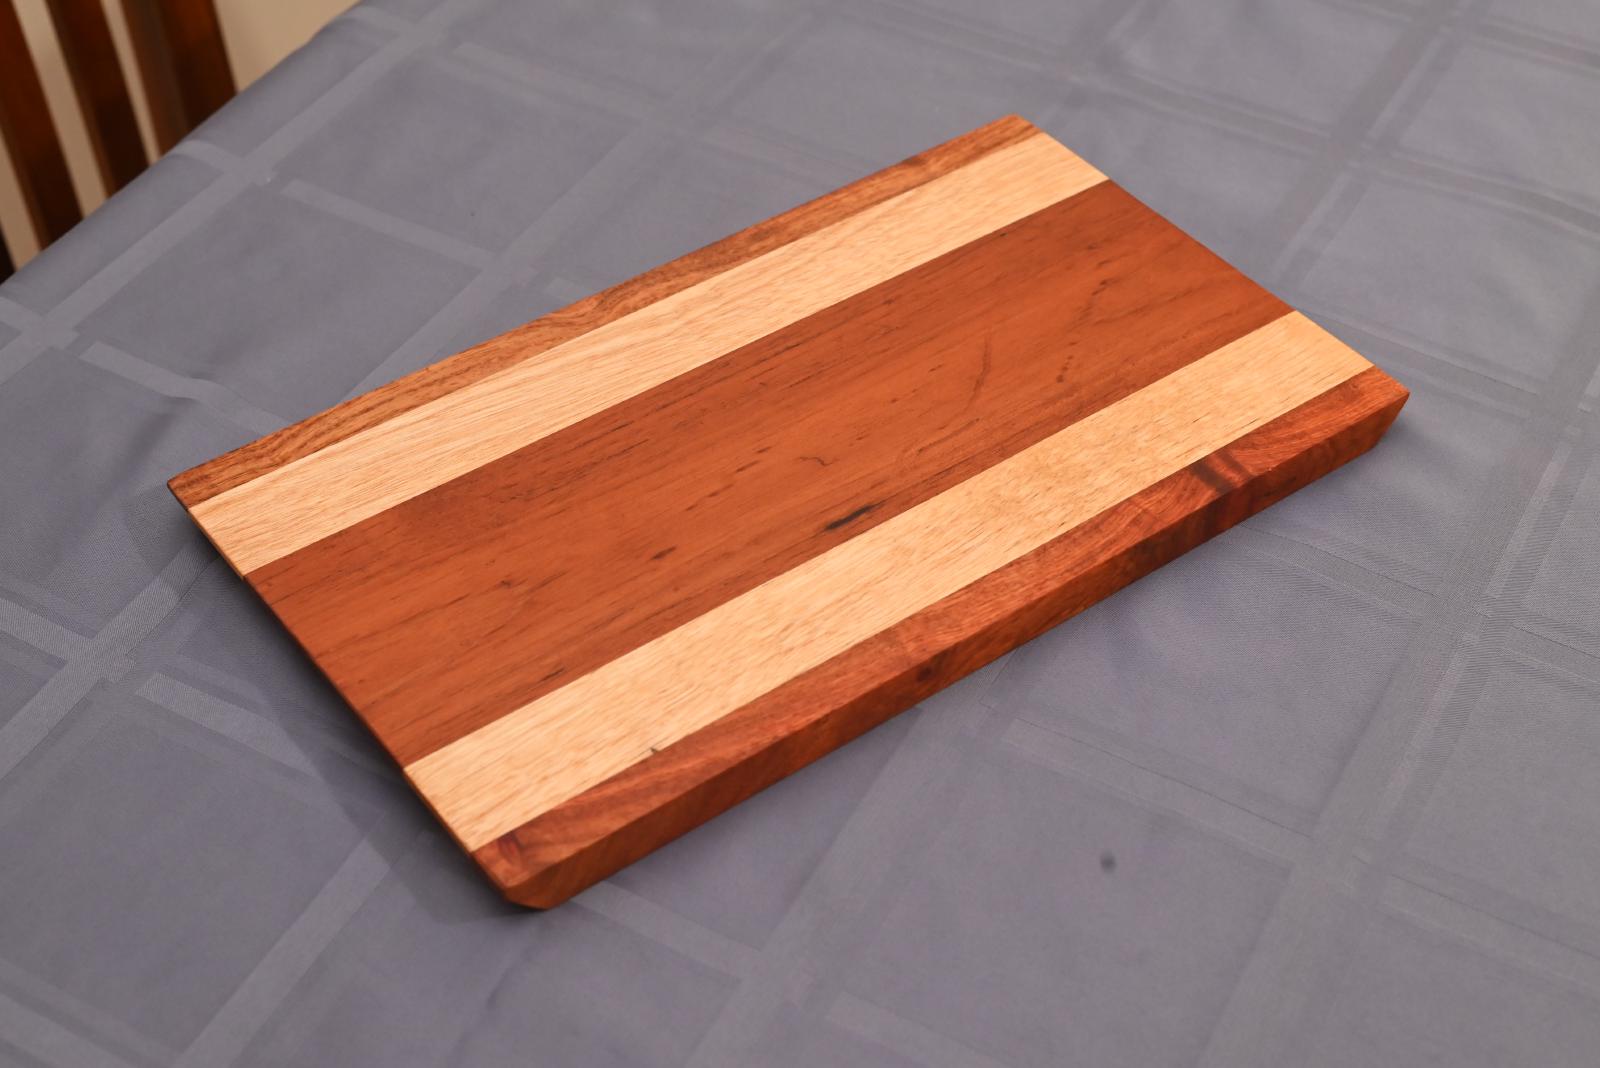 2021 - Serving board - Blackwood, Silver Ash, Red Cedar (collab with my daughter)